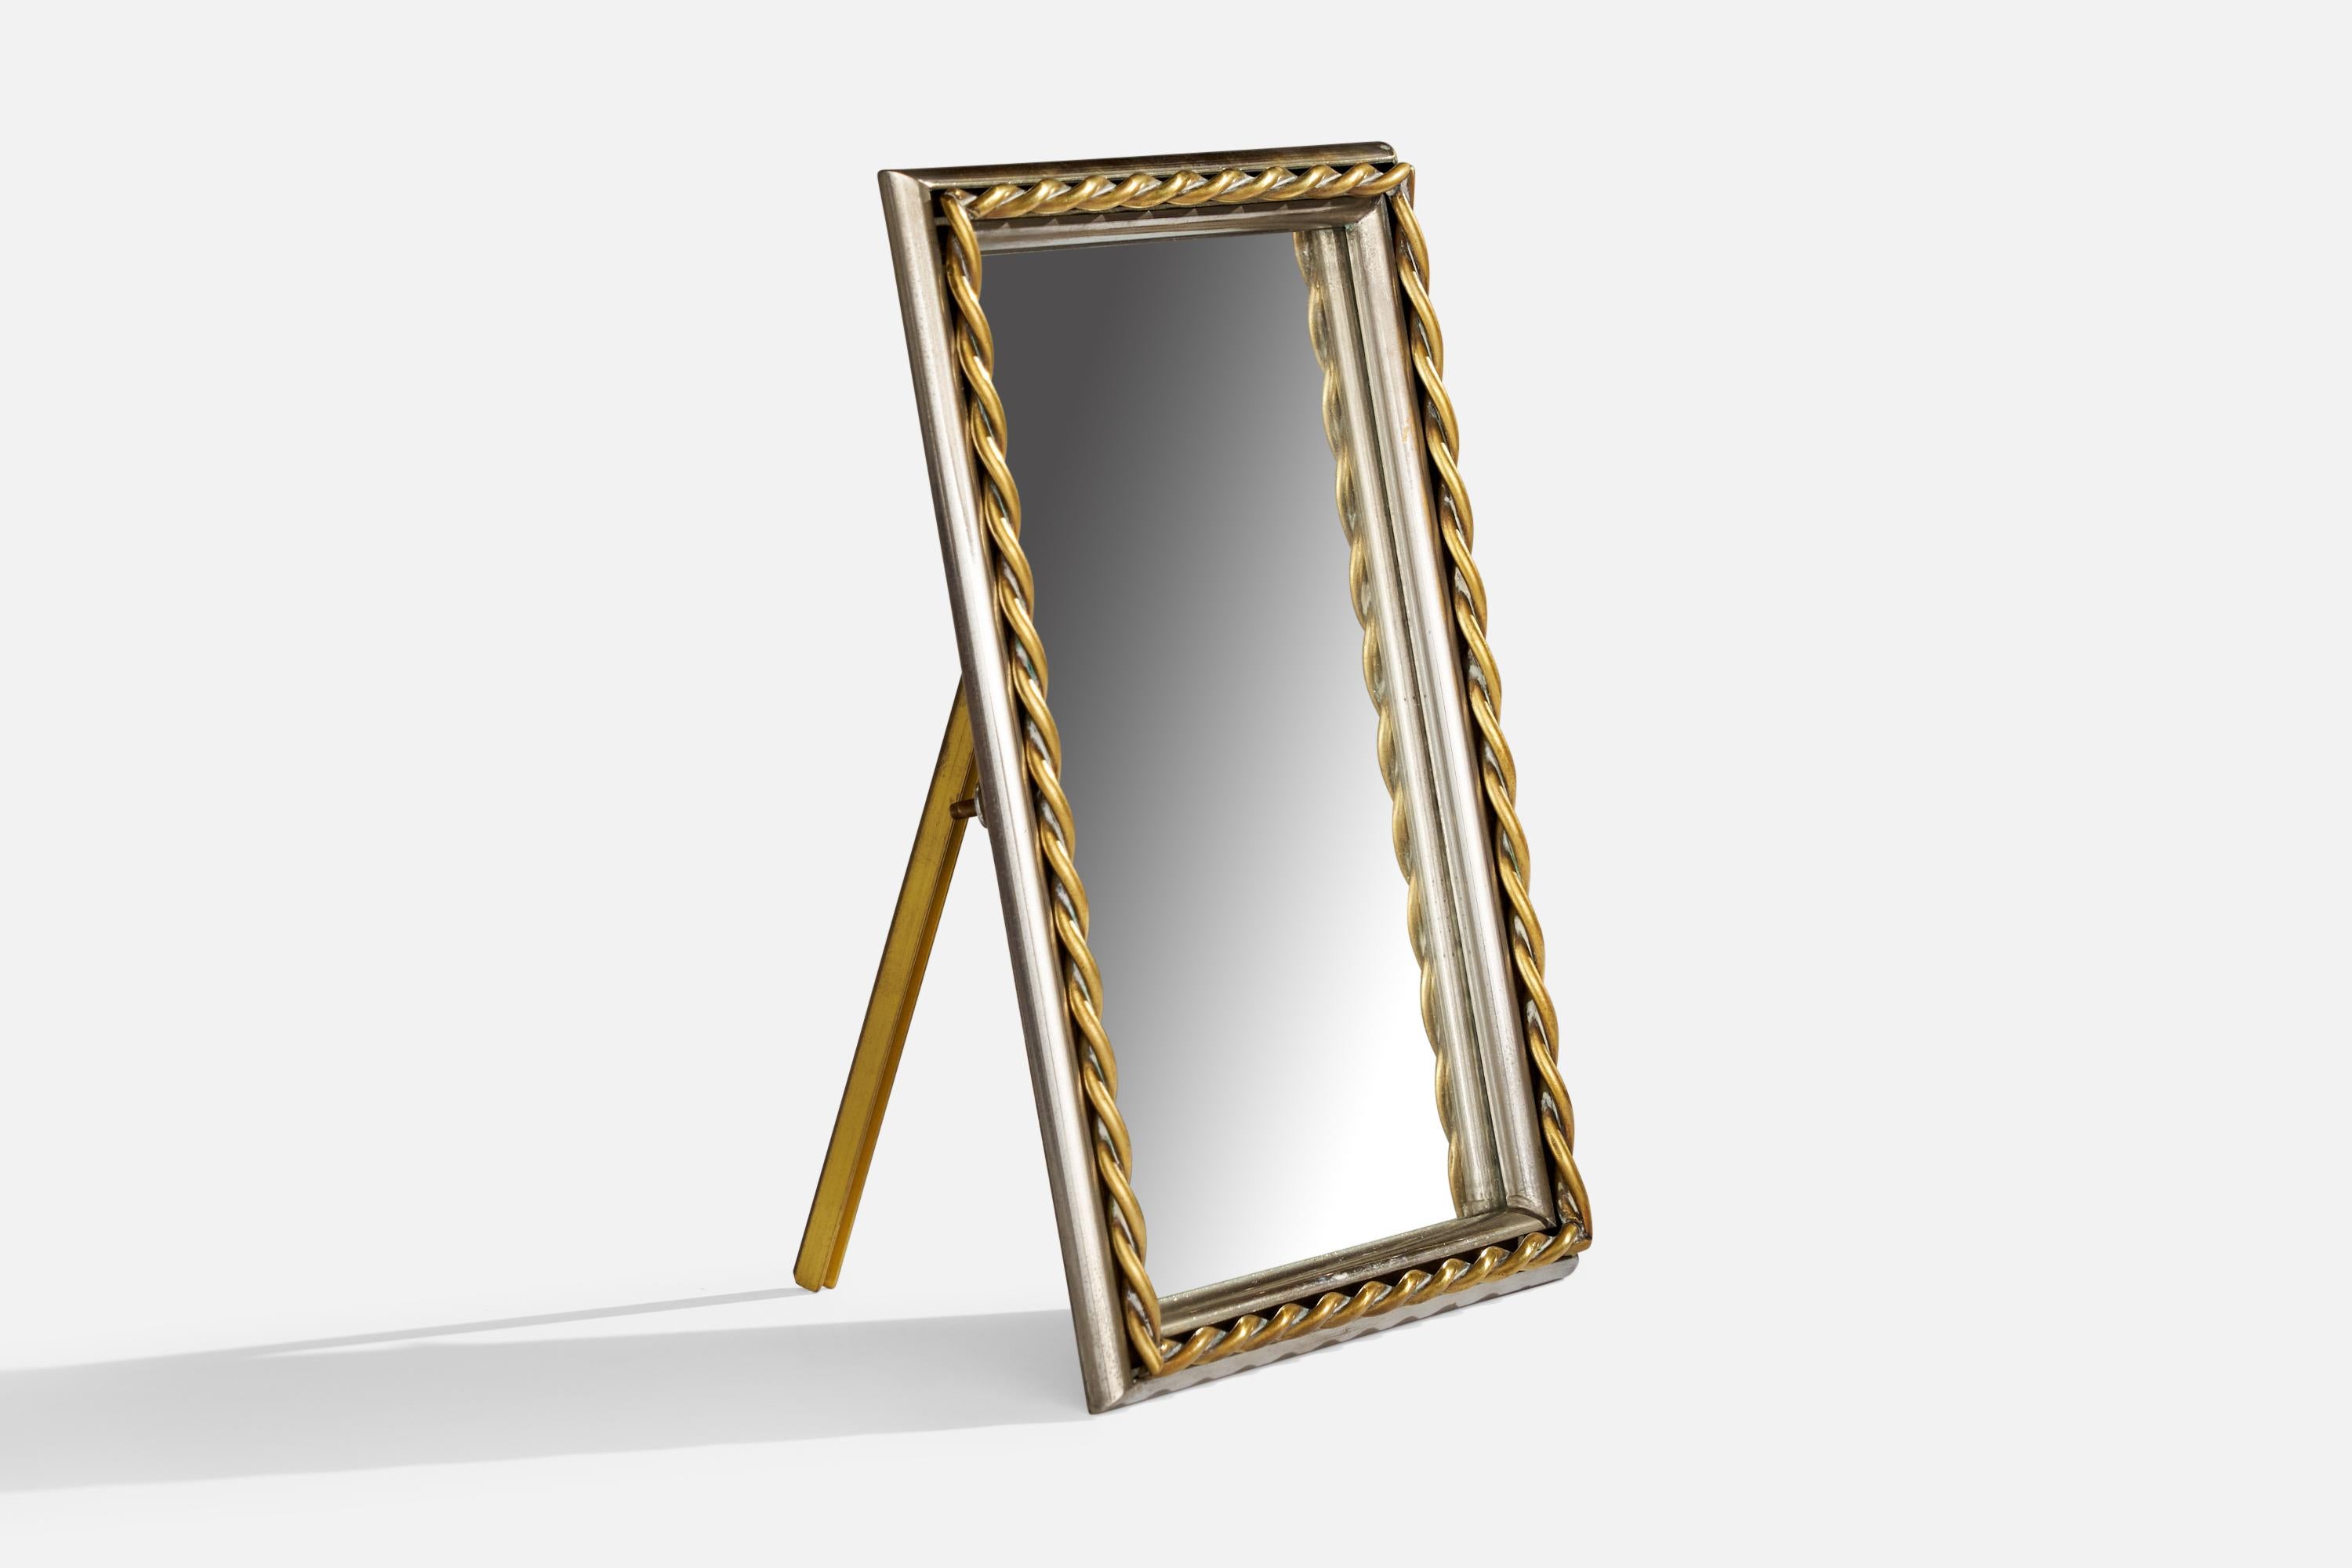 A brass table mirror designed and produced in Italy, 1940s.